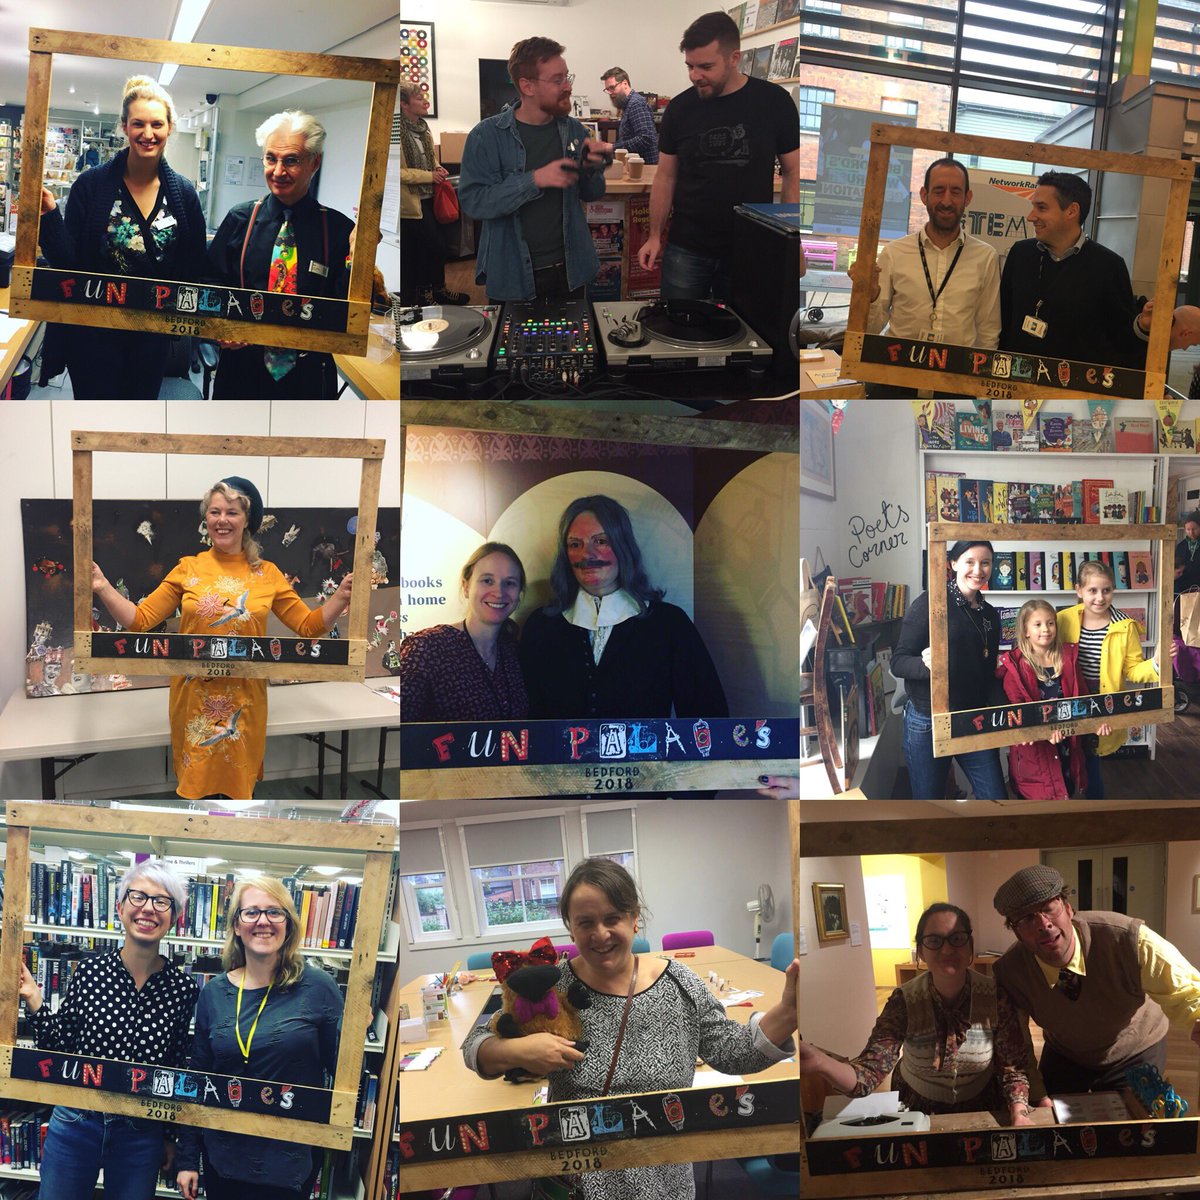 A HUGE & heartfelt THANK YOU to all our incredible #funpalaces makers & volunteers. You have made our day - & hundreds of other people’s too 🙌😊😍😊🙌 #Bedpopfunpalaces @BedfordTweets @DaveTheMayor @TheHarpurTrust @BedfordExplore